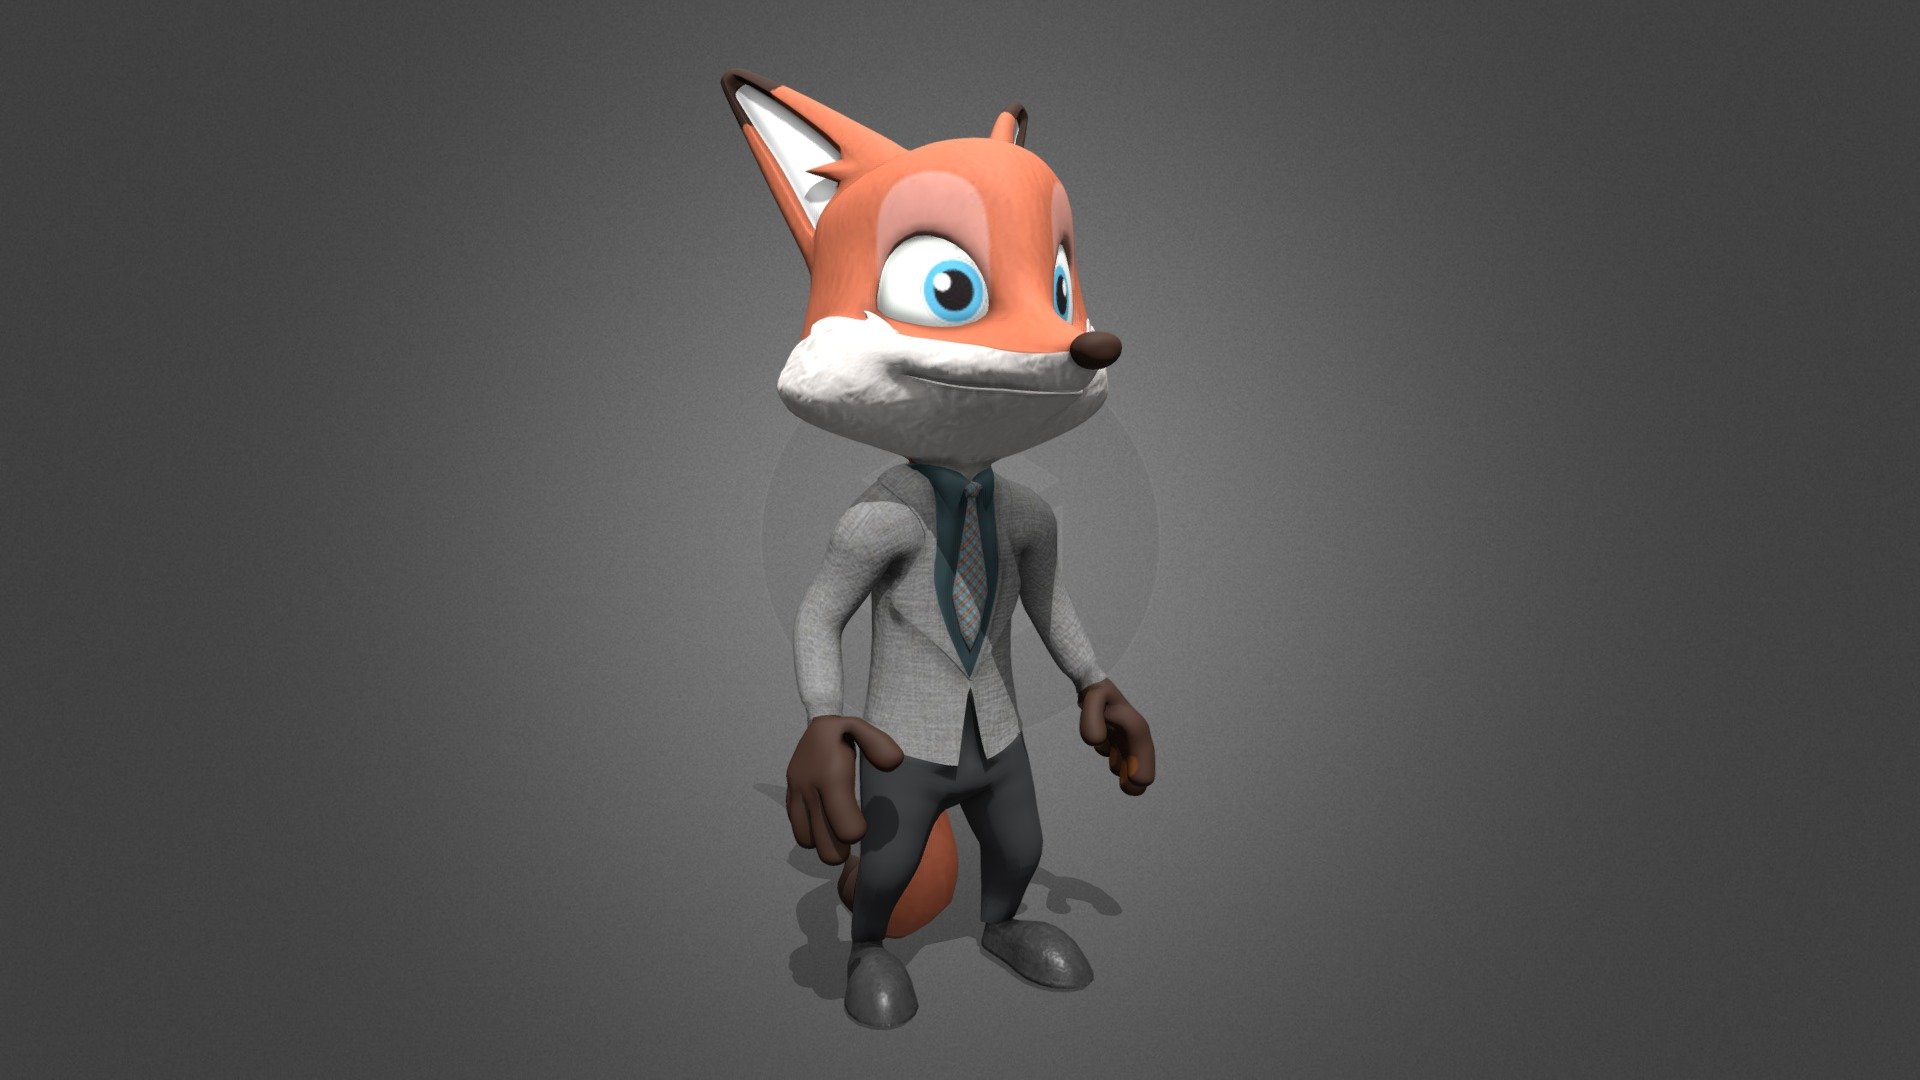 A business fox character modeled for my current employer.  Character desgin by our freelancer Jeuel.  Modeling was done in Maya.  Texturing done in Substance Painter and Photoshop.  Idle animation by Mixamo.

Fur material found on substance share by the artist rmahon
Tie material found on substance share by the artist flo.jonas - Business Fox Character - 3D model by Jacob Monger (@jacobmonger) 3d model